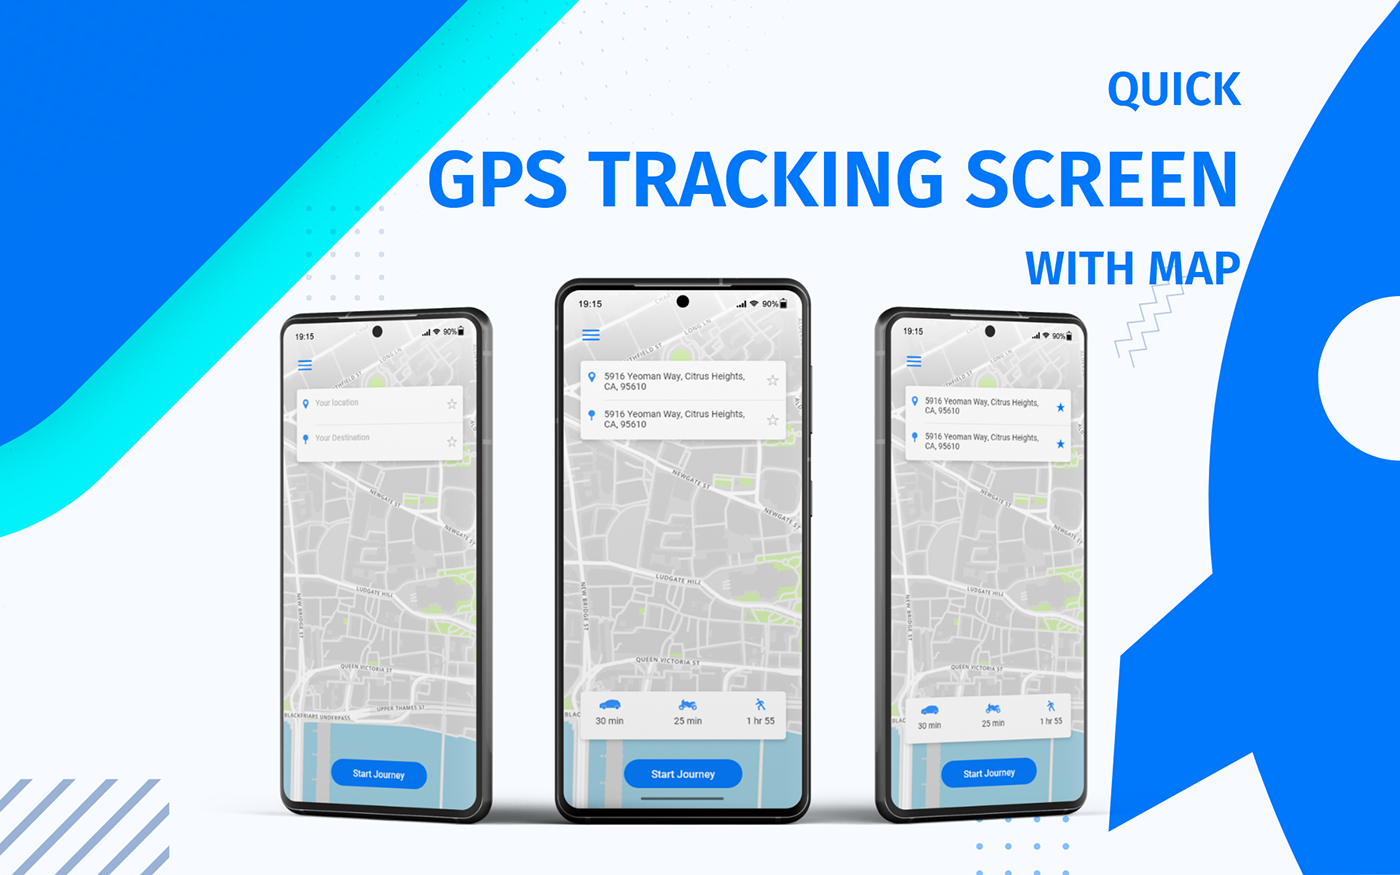 app design gps tracker GPS tracking location location tracker map Map Integration UI/UX user experience user interface